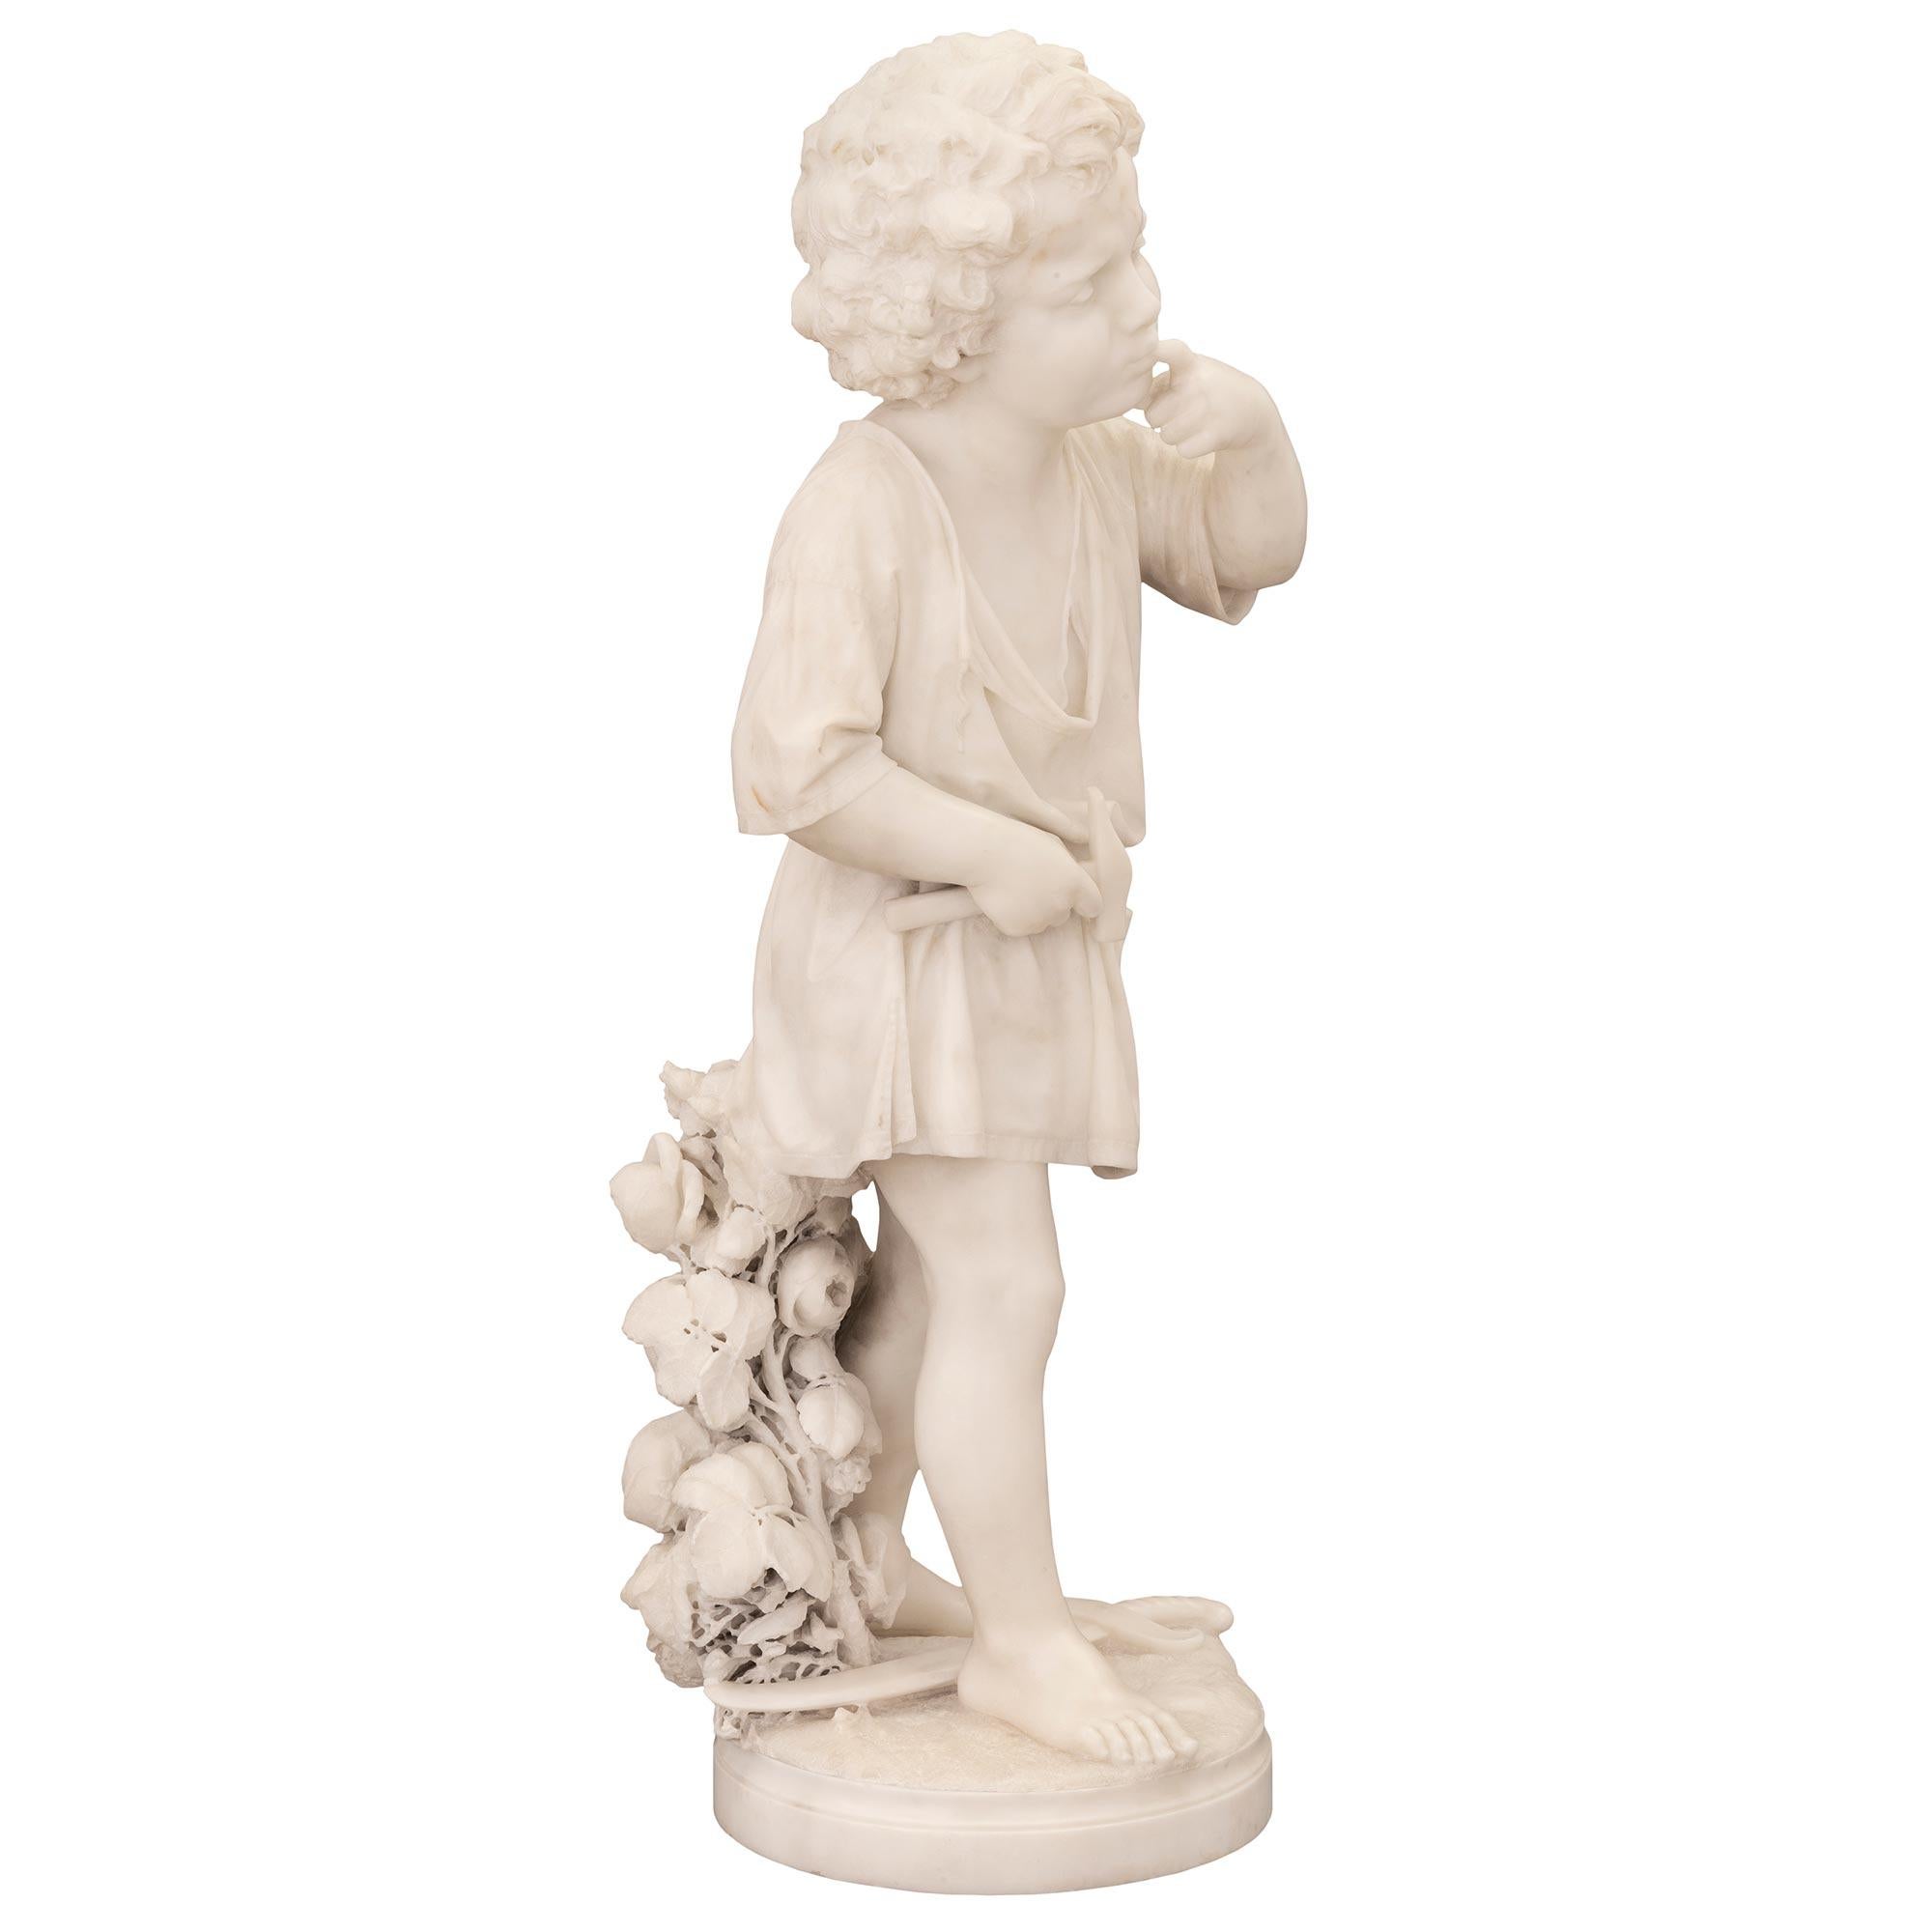 A stunning and very charming museum-quality Italian 19th century white Carrara marble statue of a boy signed Ugo Zannoni Milano 1876. The statue of a young boy having hit his finger with a hammer is raised by a circular base with a fine mottled